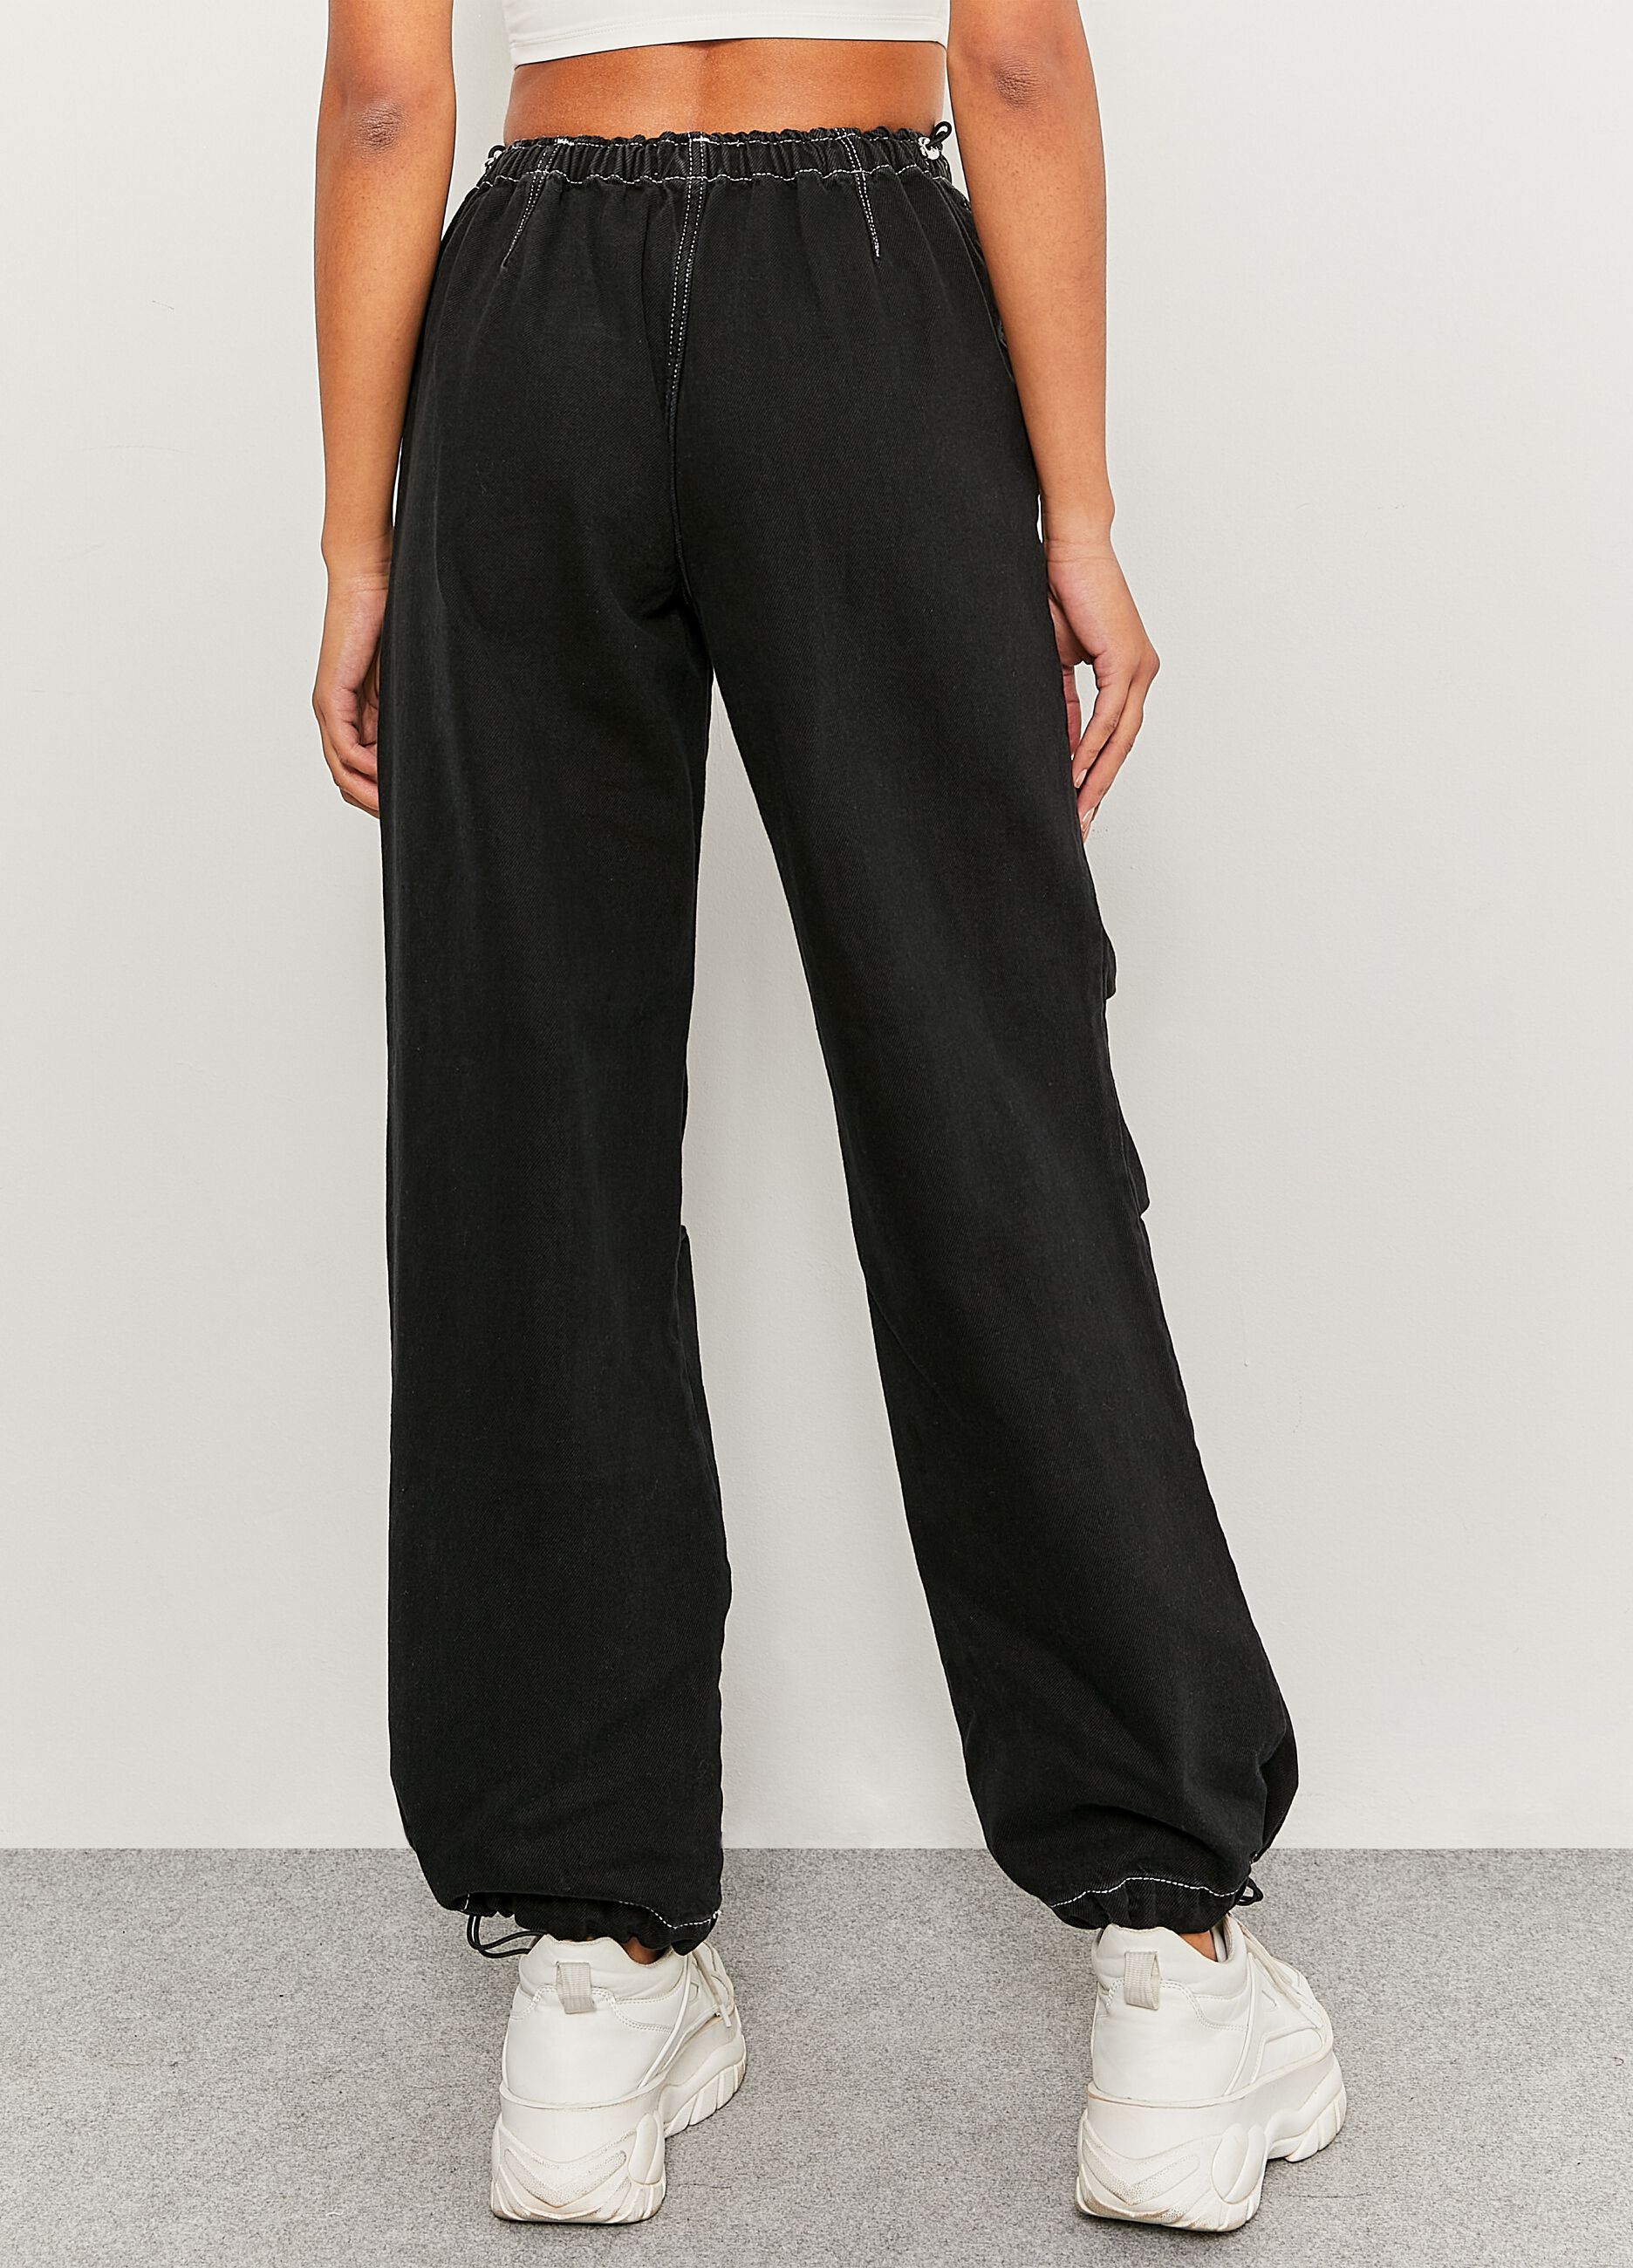 Parachute trousers in cotton_3